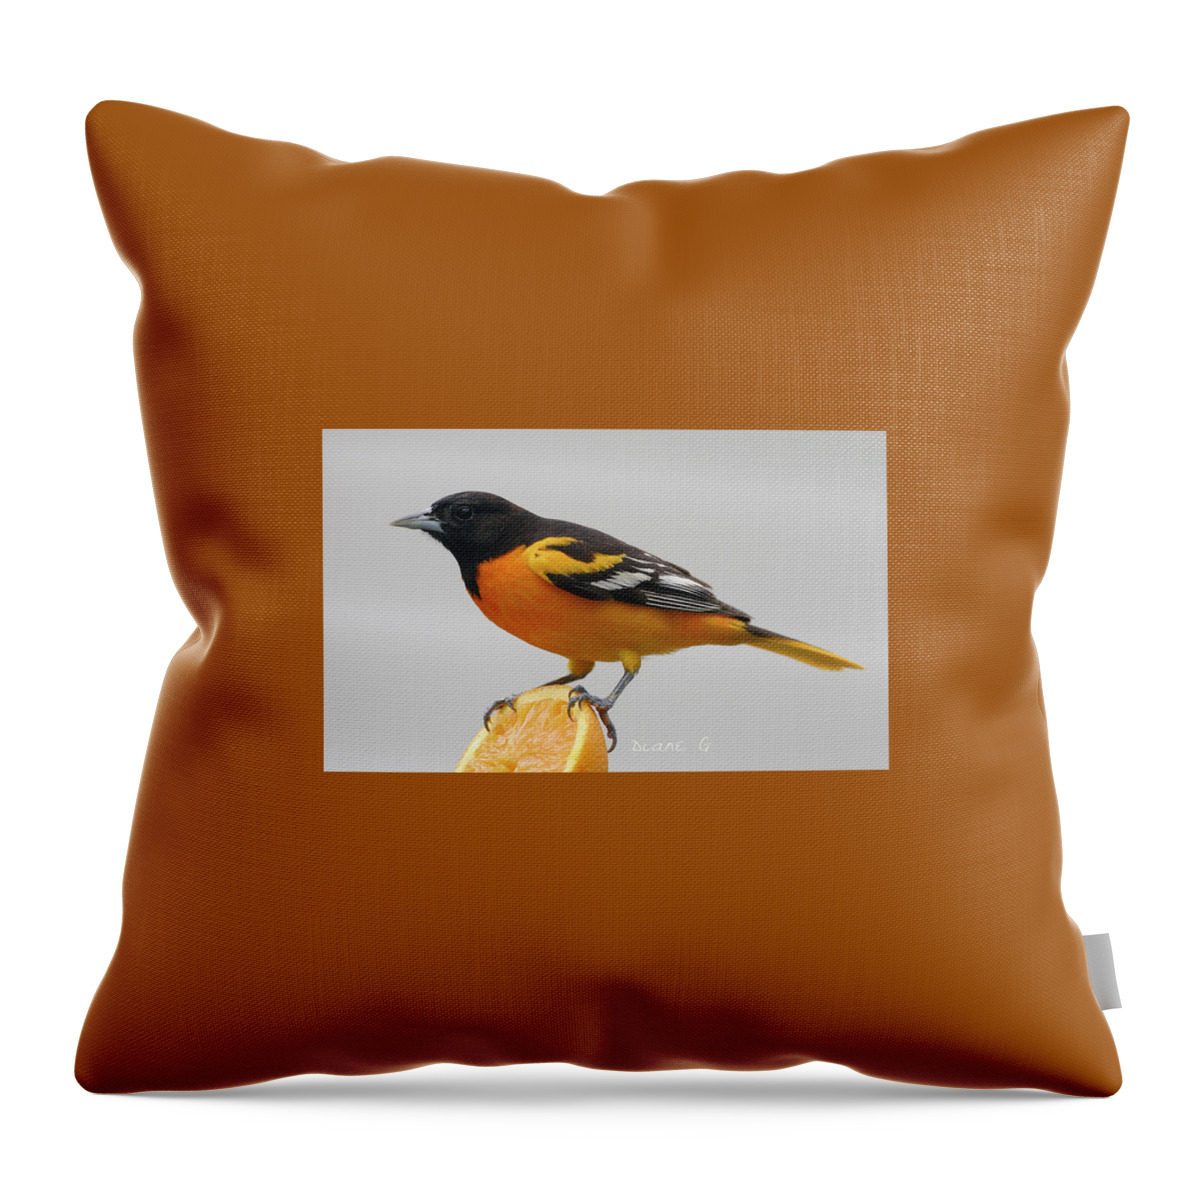 Male Baltimore Oriole Throw Pillow featuring the photograph Male Baltimore Oriole by Diane Giurco